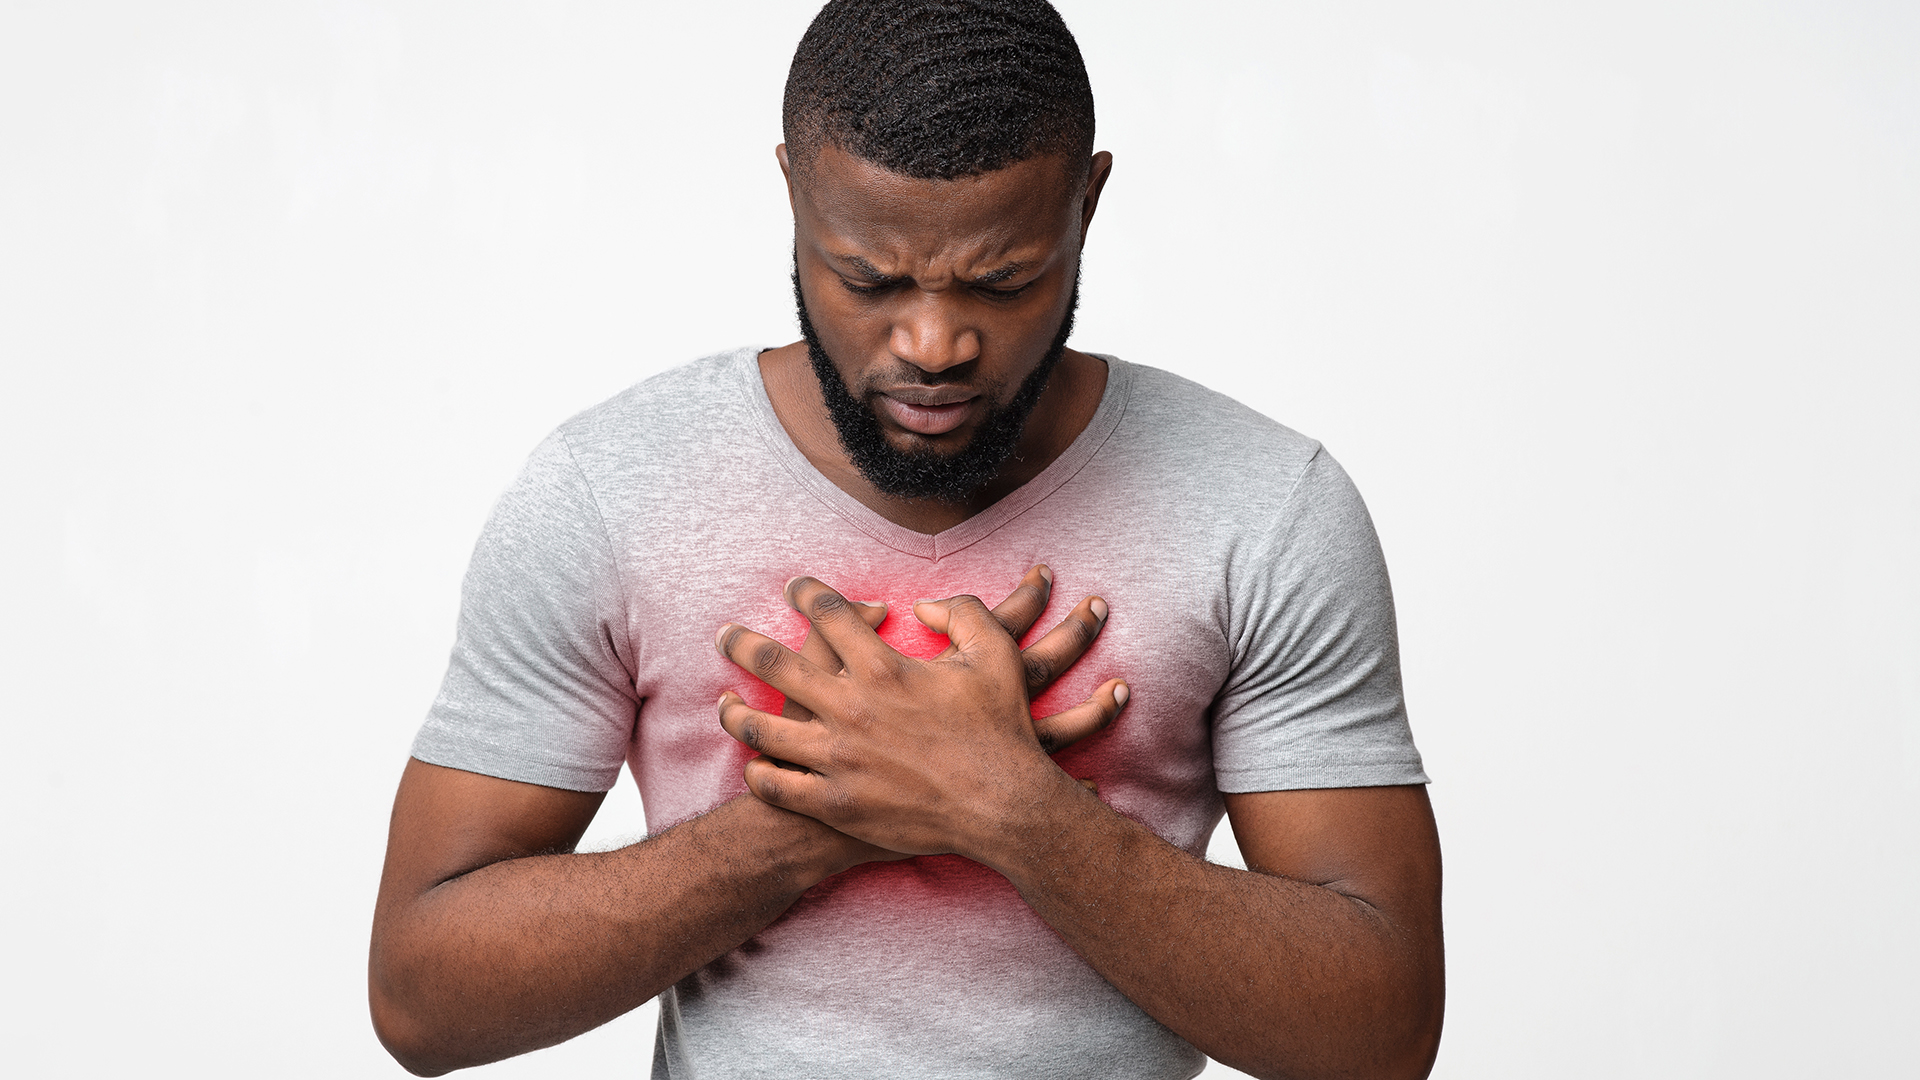 Man with Heartburn participating in a clinical trial hero